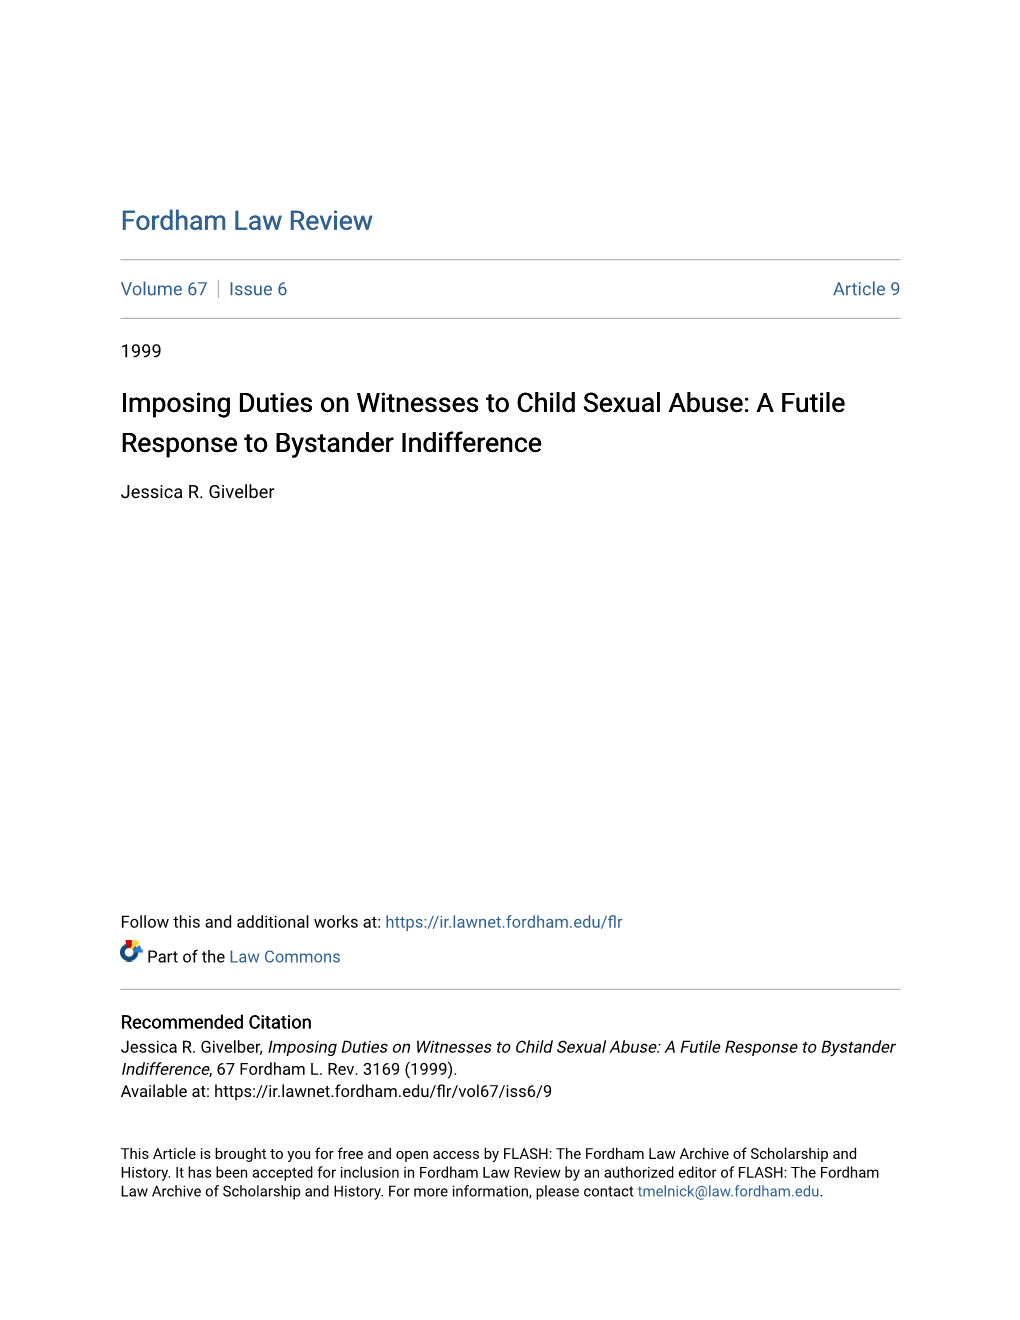 Imposing Duties on Witnesses to Child Sexual Abuse: a Futile Response to Bystander Indifference